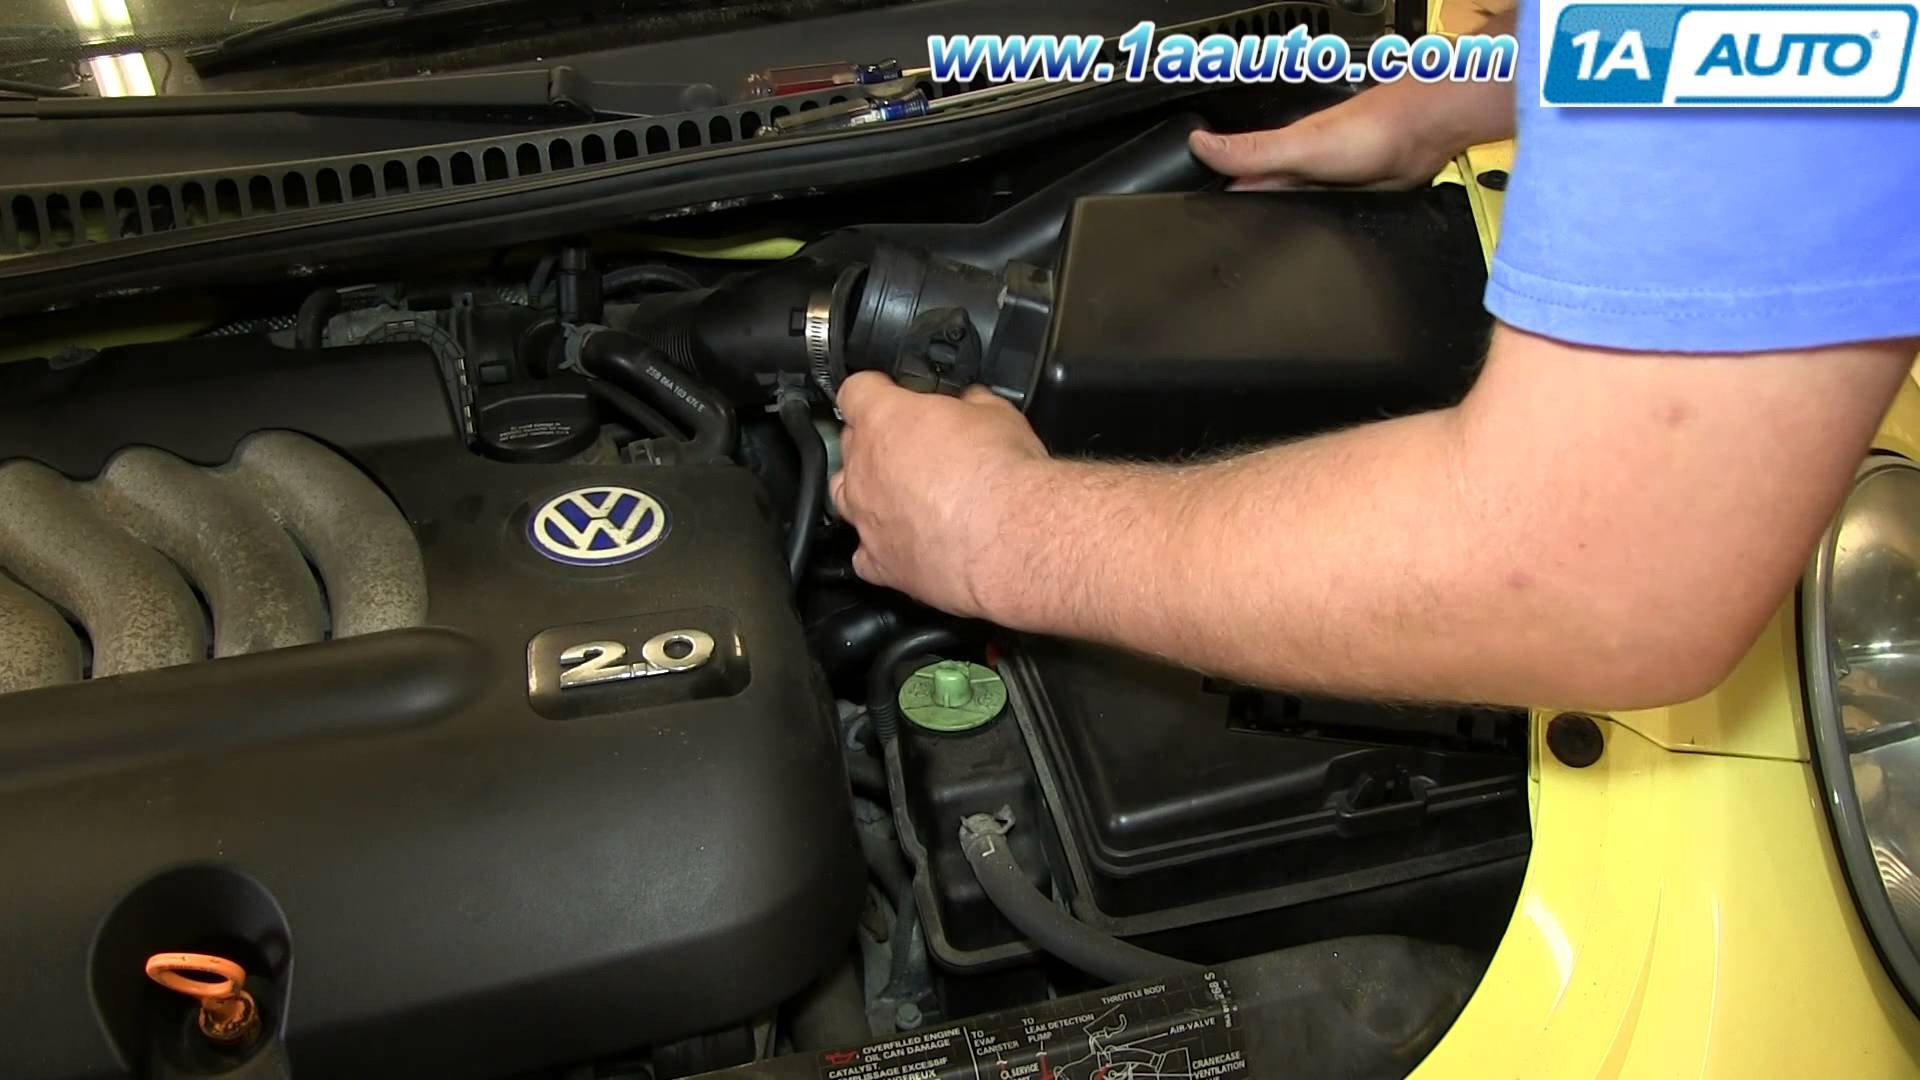 2000 Vw Beetle 1 8 Turbo Engine Diagram How to Install Replace Maf Mass Air Flow Sensor 2001 05 1 8l Turbo Of 2000 Vw Beetle 1 8 Turbo Engine Diagram